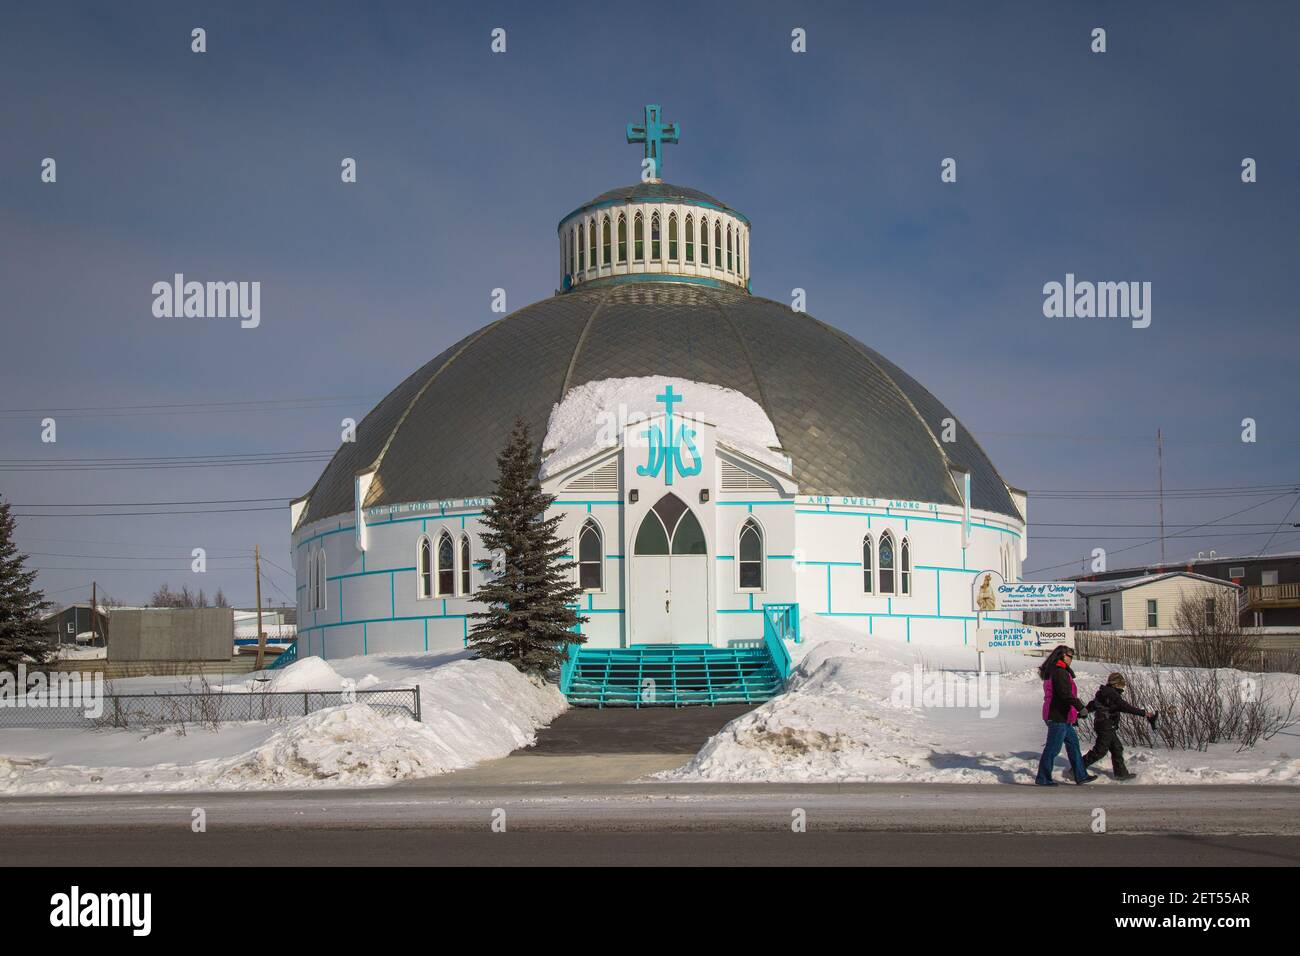 The iconic Our Lady of Victory igloo-shaped church in Inuvik, Northwest Territories, Canada's Arctic. Stock Photo